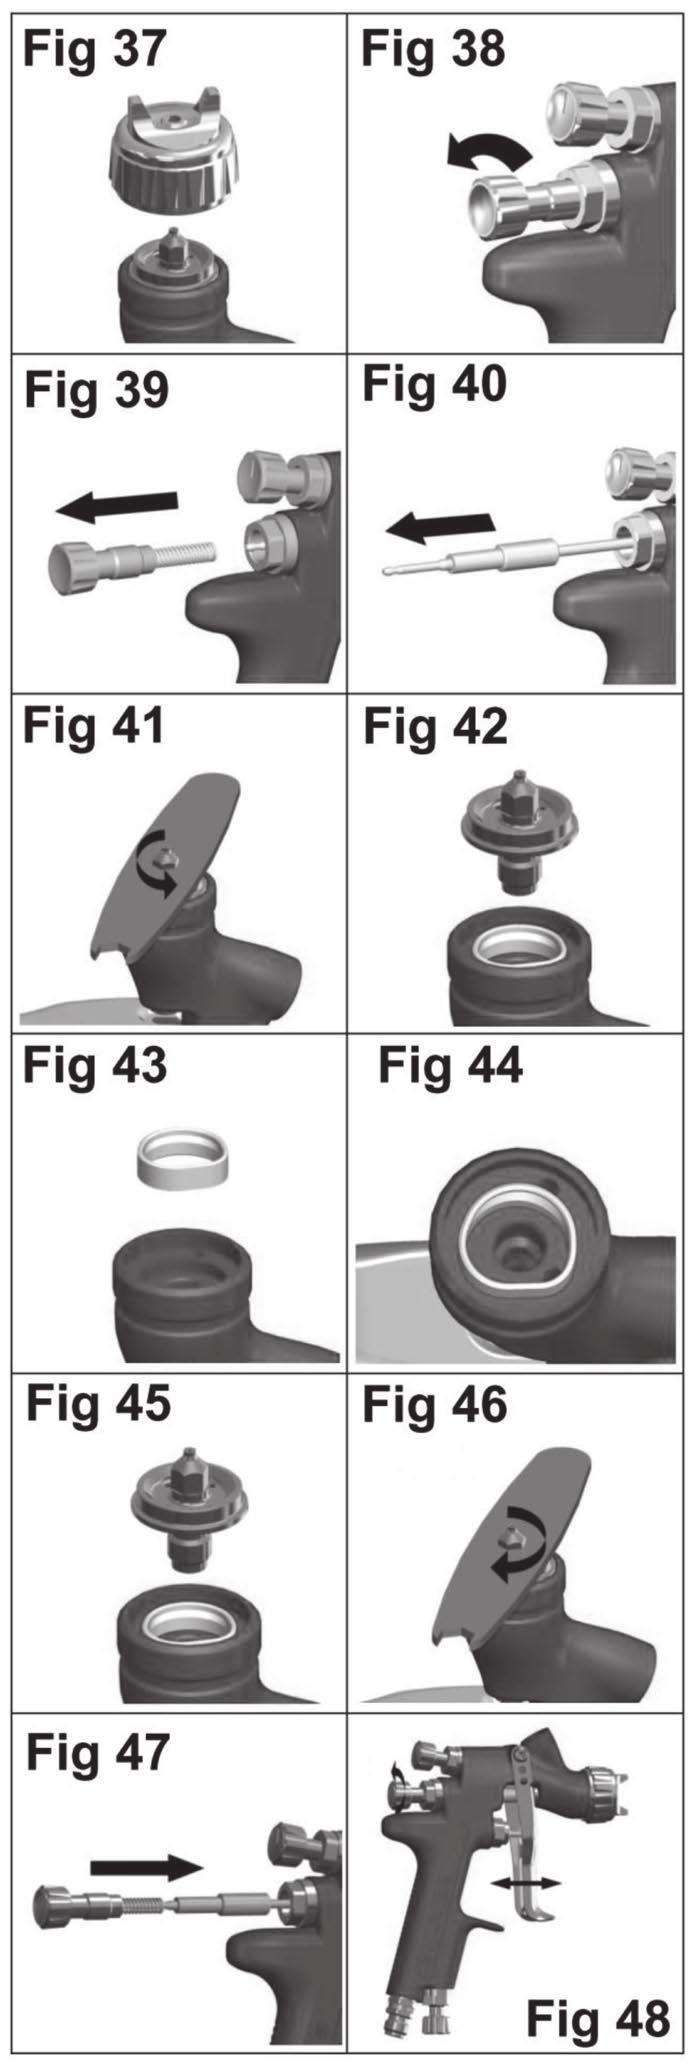 Page 12 Parts Replacement/Maintenance SEPARATOR SEAL INSTRUCTIONS Replacing Separator Seal 1. Remove air cap and retaining ring. (See fig 37) 2. Remove fluid adjusting knob, spring, and spring pad.